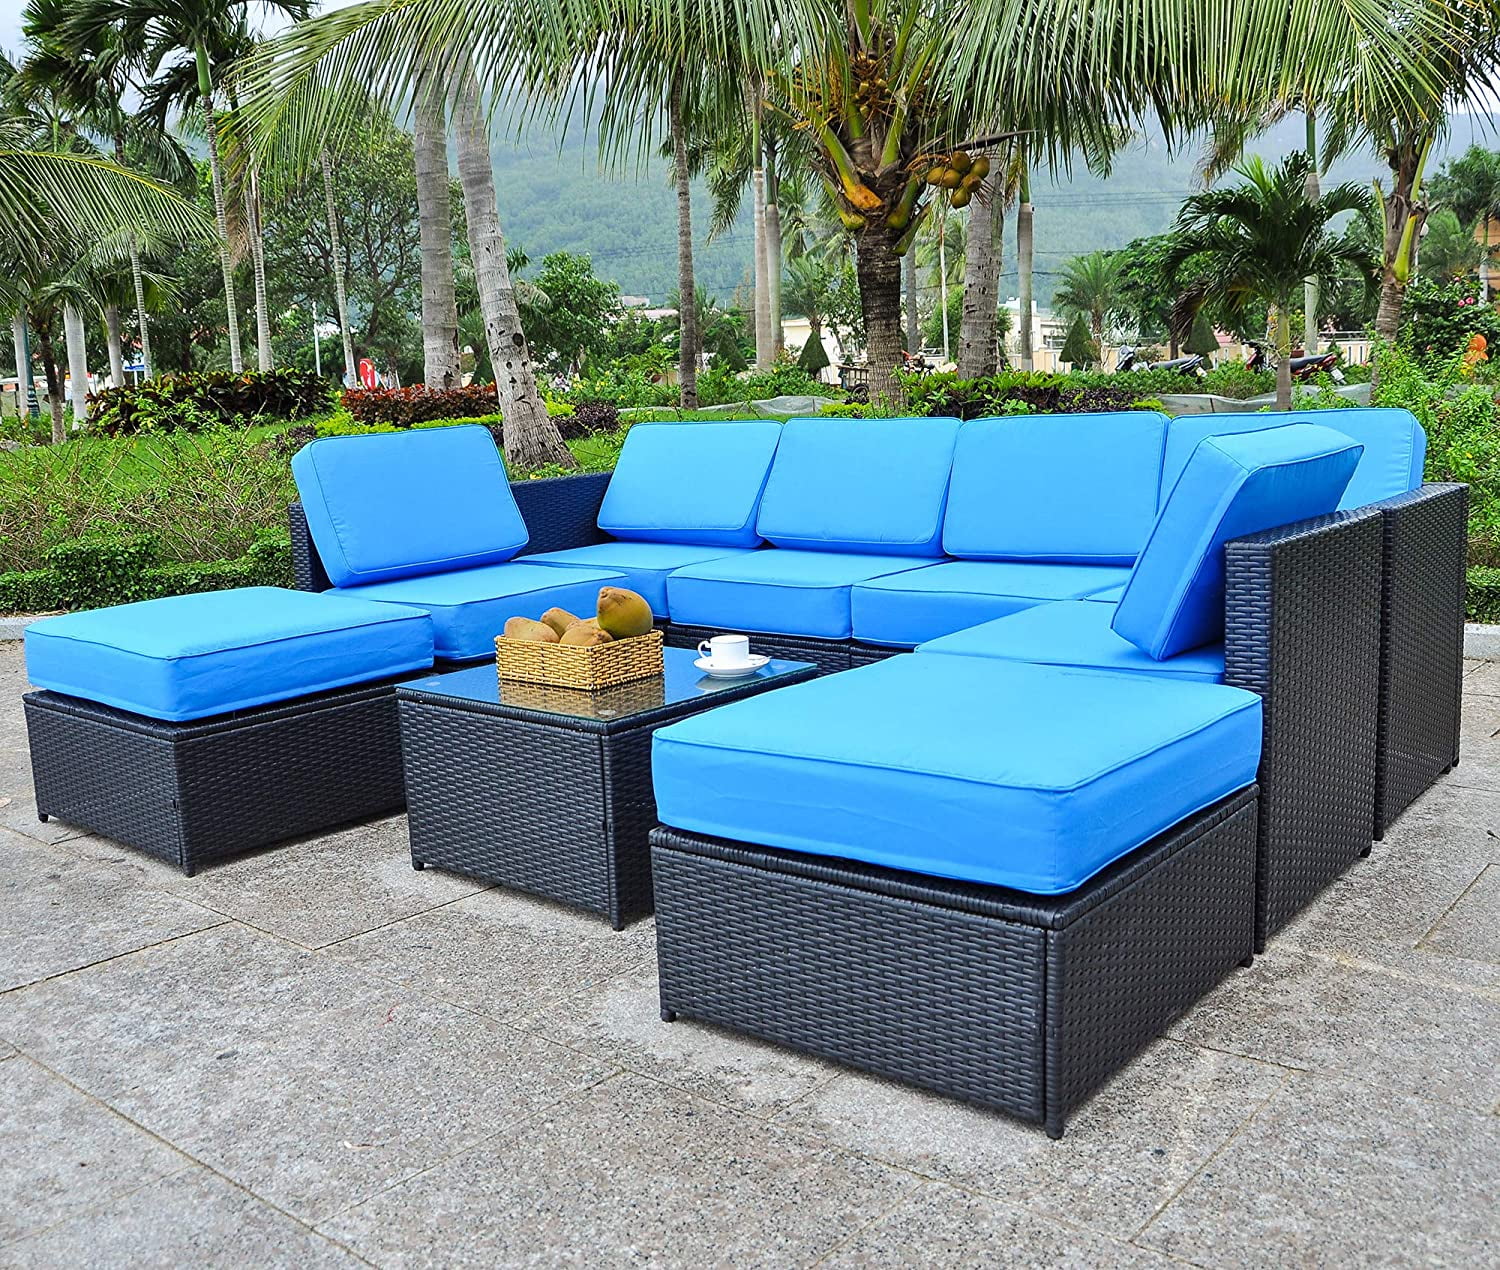 Mcombo Patio Furniture Sectional 9 Pieces Wicker Sofa Set All-Weather